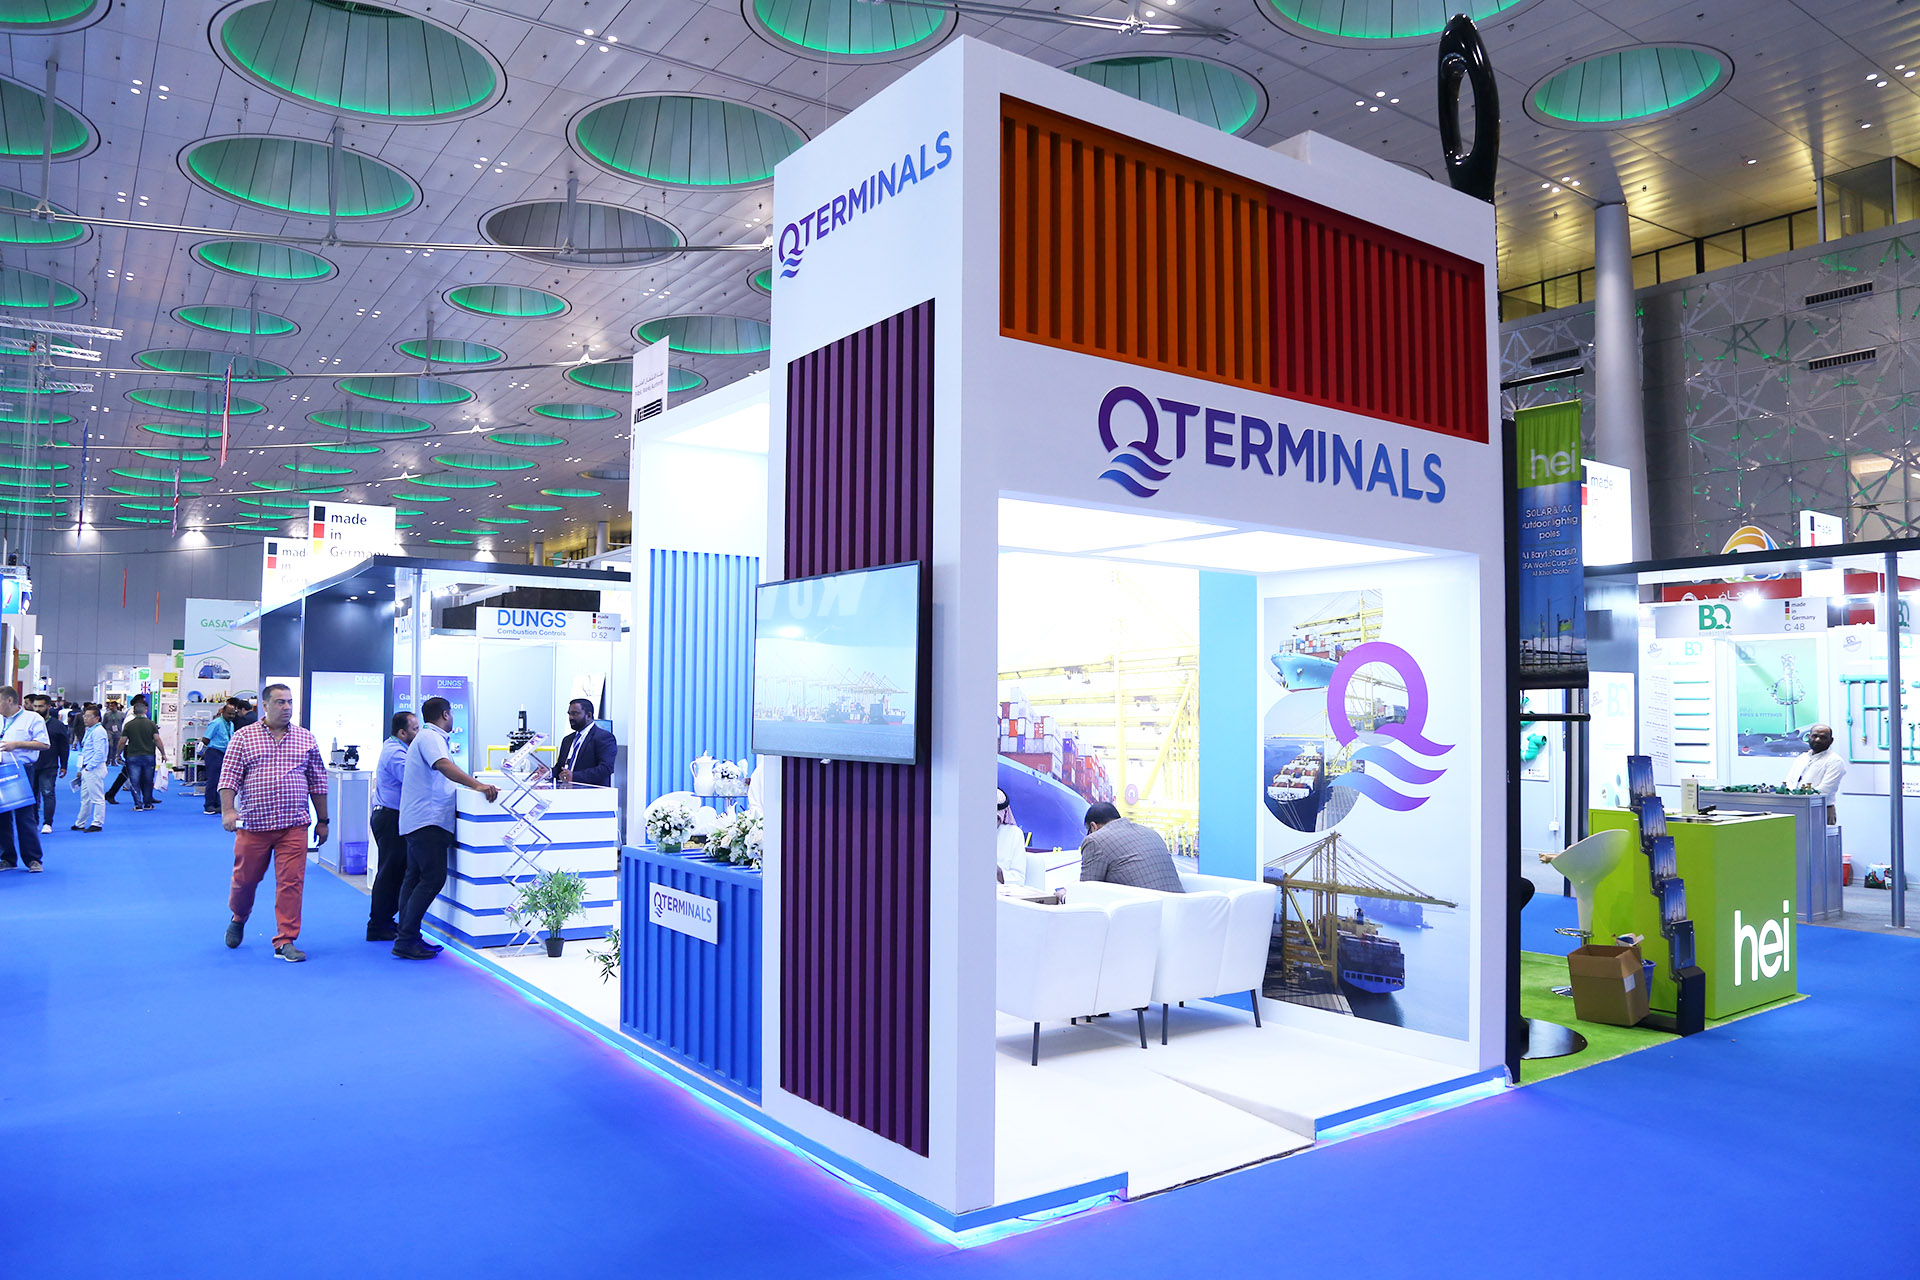 Award winning exhibition stand for QTerminals at Project Qatar, designed and fabricated by ME Visual